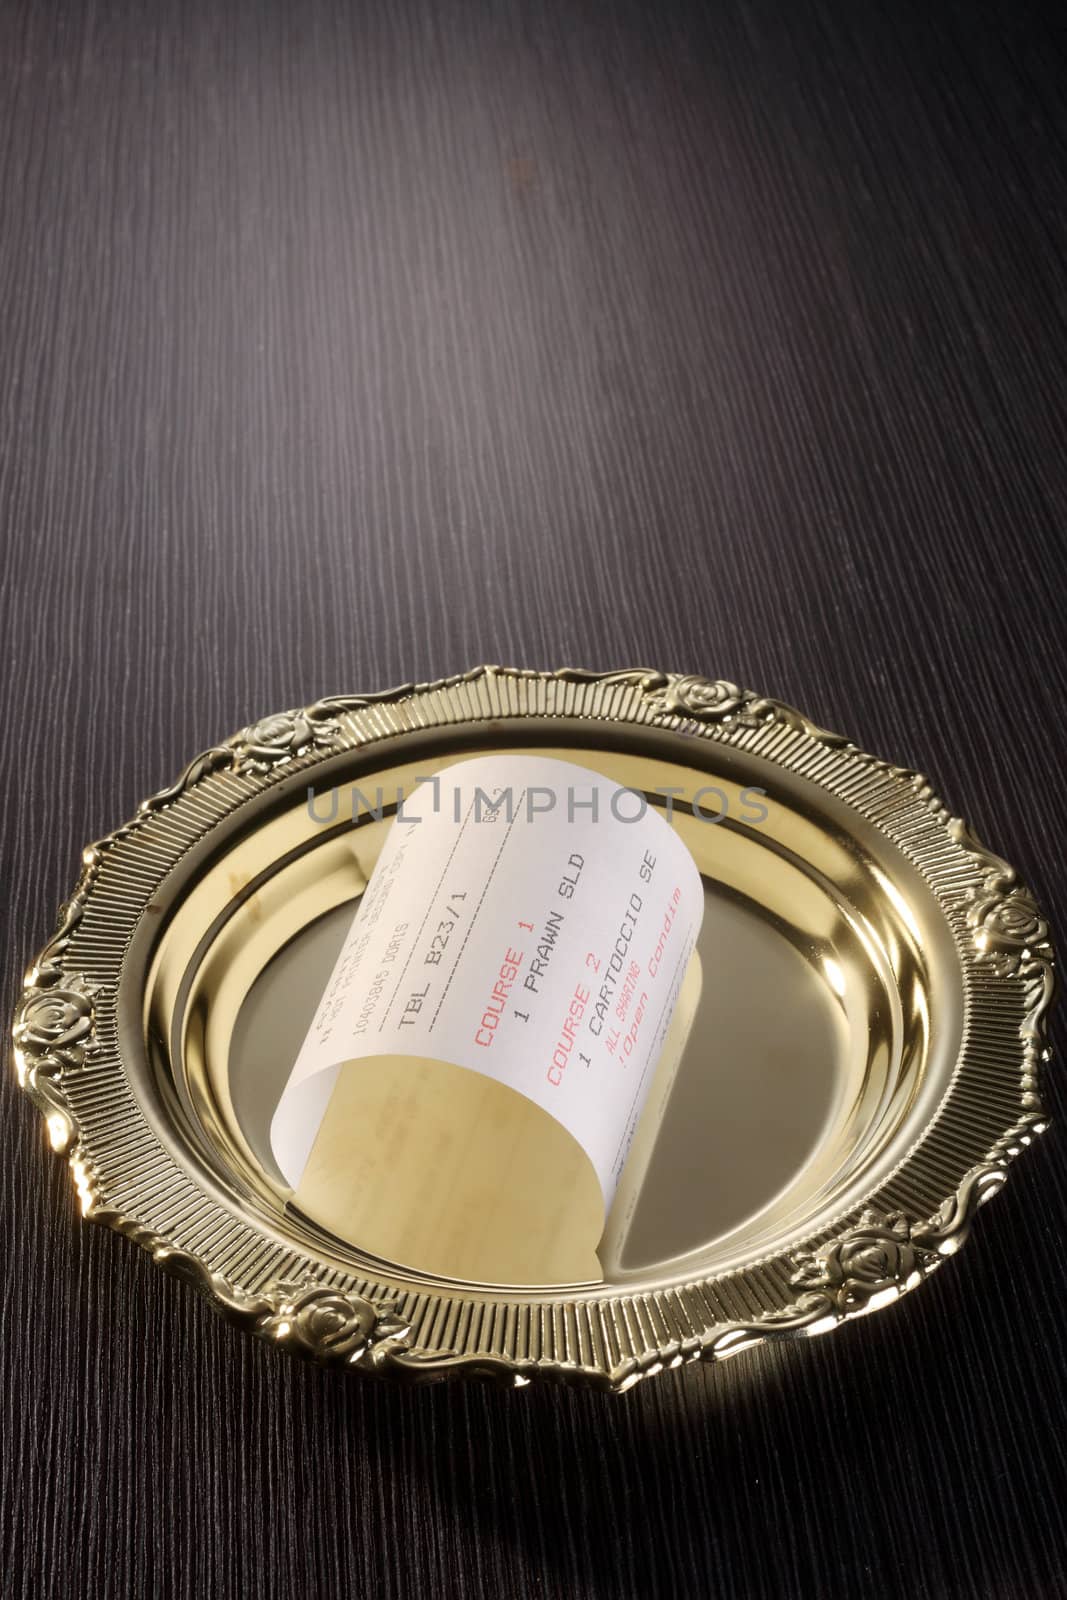 stock image of the curly recipt on the golden plate